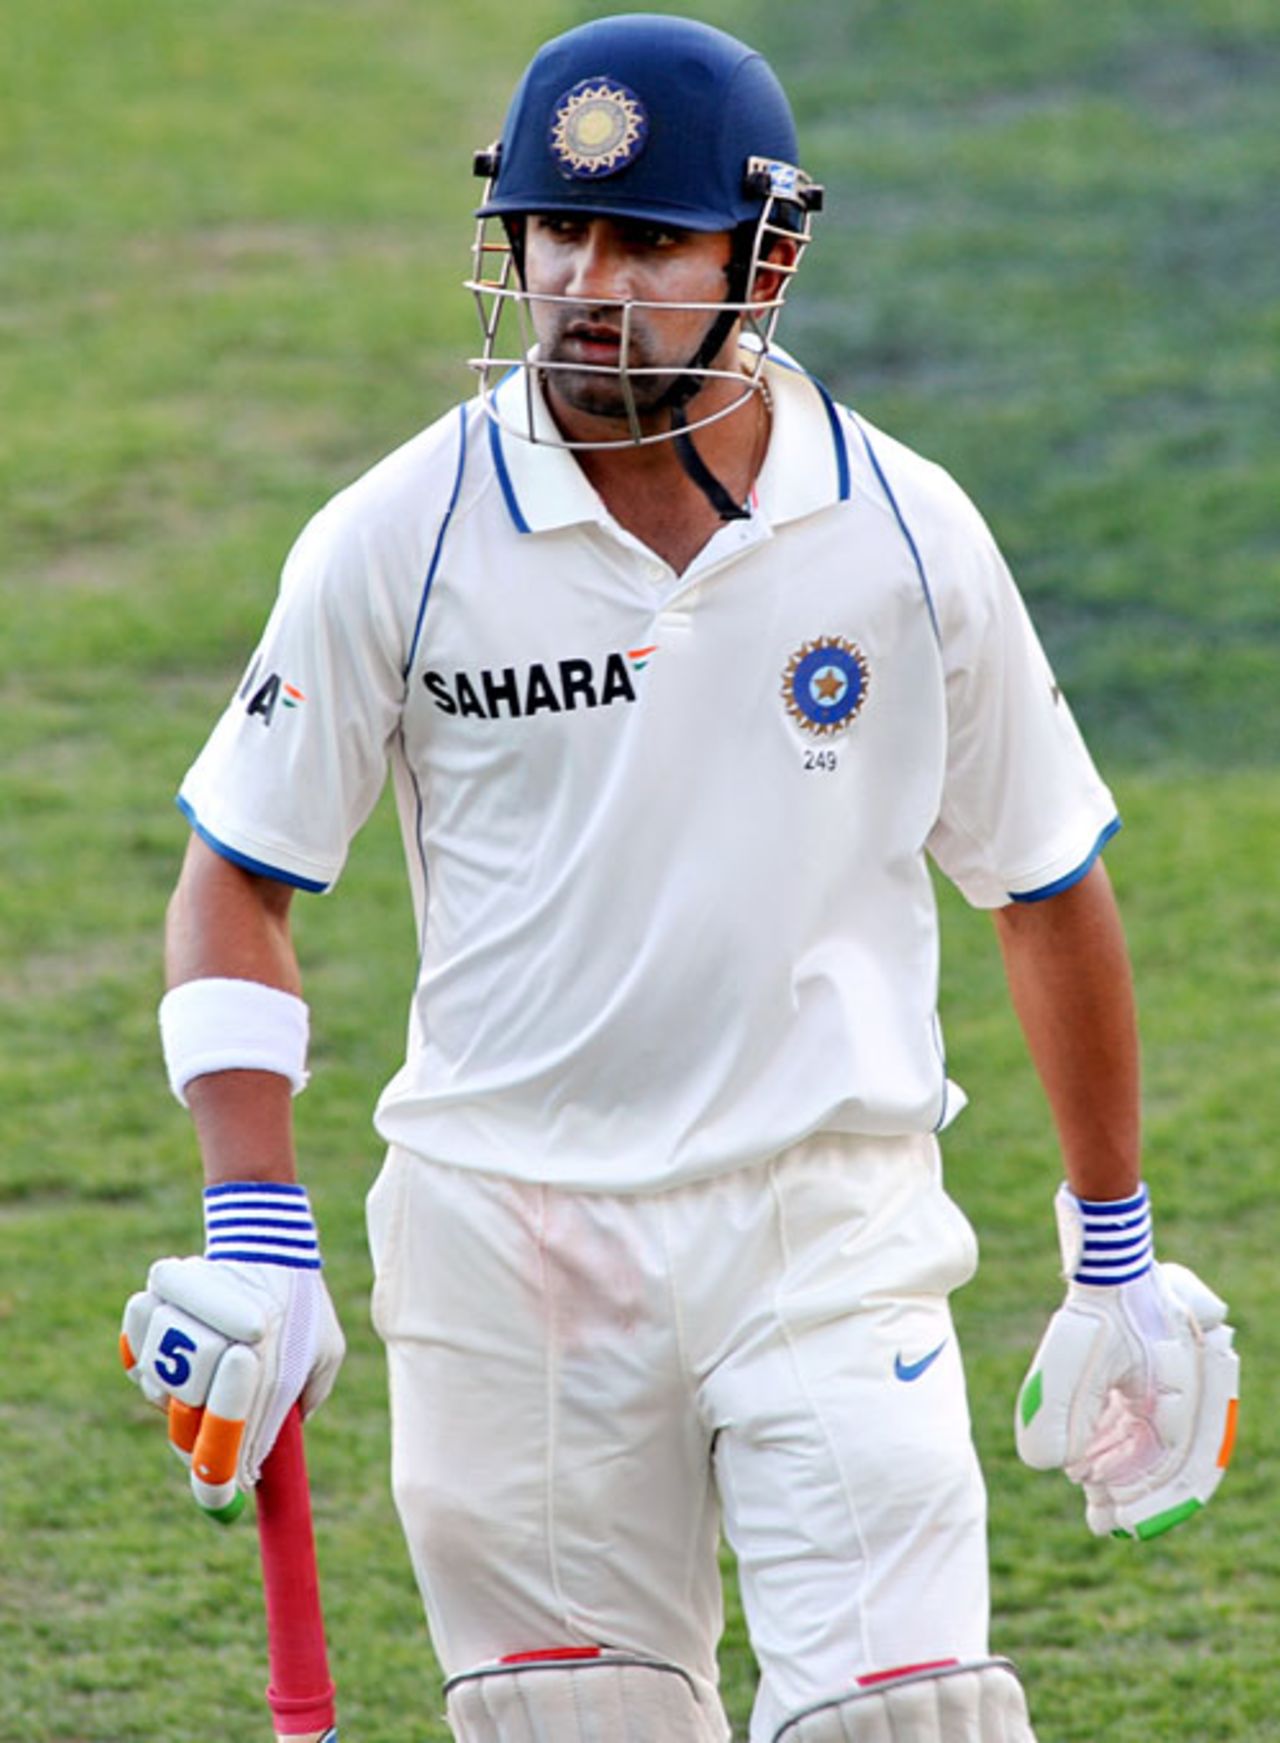 Gautam Gambhir walks back after being dismissed for 16, New Zealand v India, 2nd Test, Napier, 2nd day, March 27, 2009